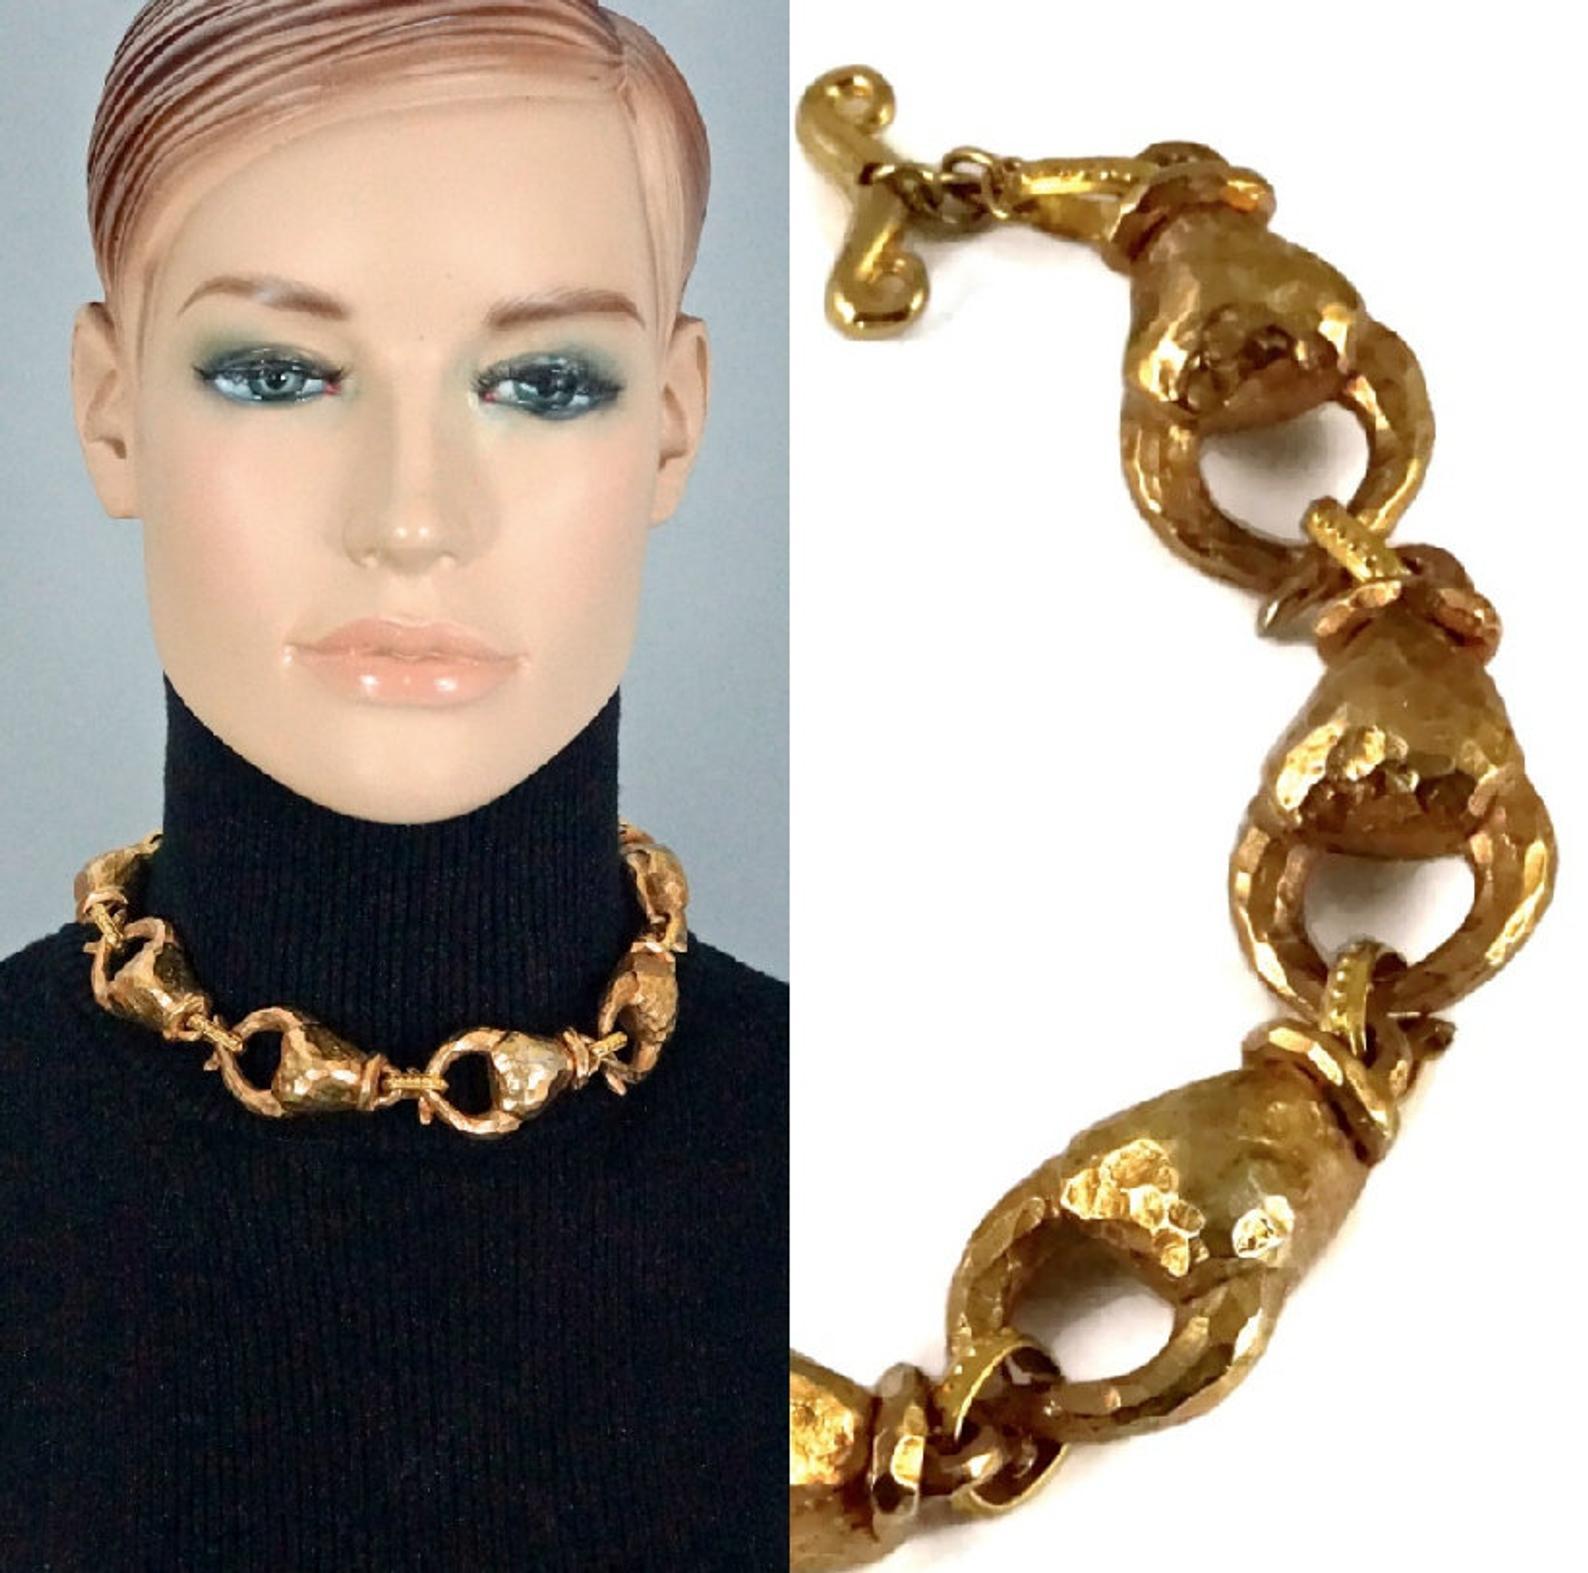 Vintage ALEXIS LAHELLEC PARIS Hammered Claw Choker Necklace

Measurements:
Height: 1.10 inches (2.8 cm)
Length: 16.33 inches (41.5 cm)

Features:
- 100% Authentic ALEXIS LAHELLEC PARIS.
- 3 dimensional hammered claw link choker necklace.
- Gold